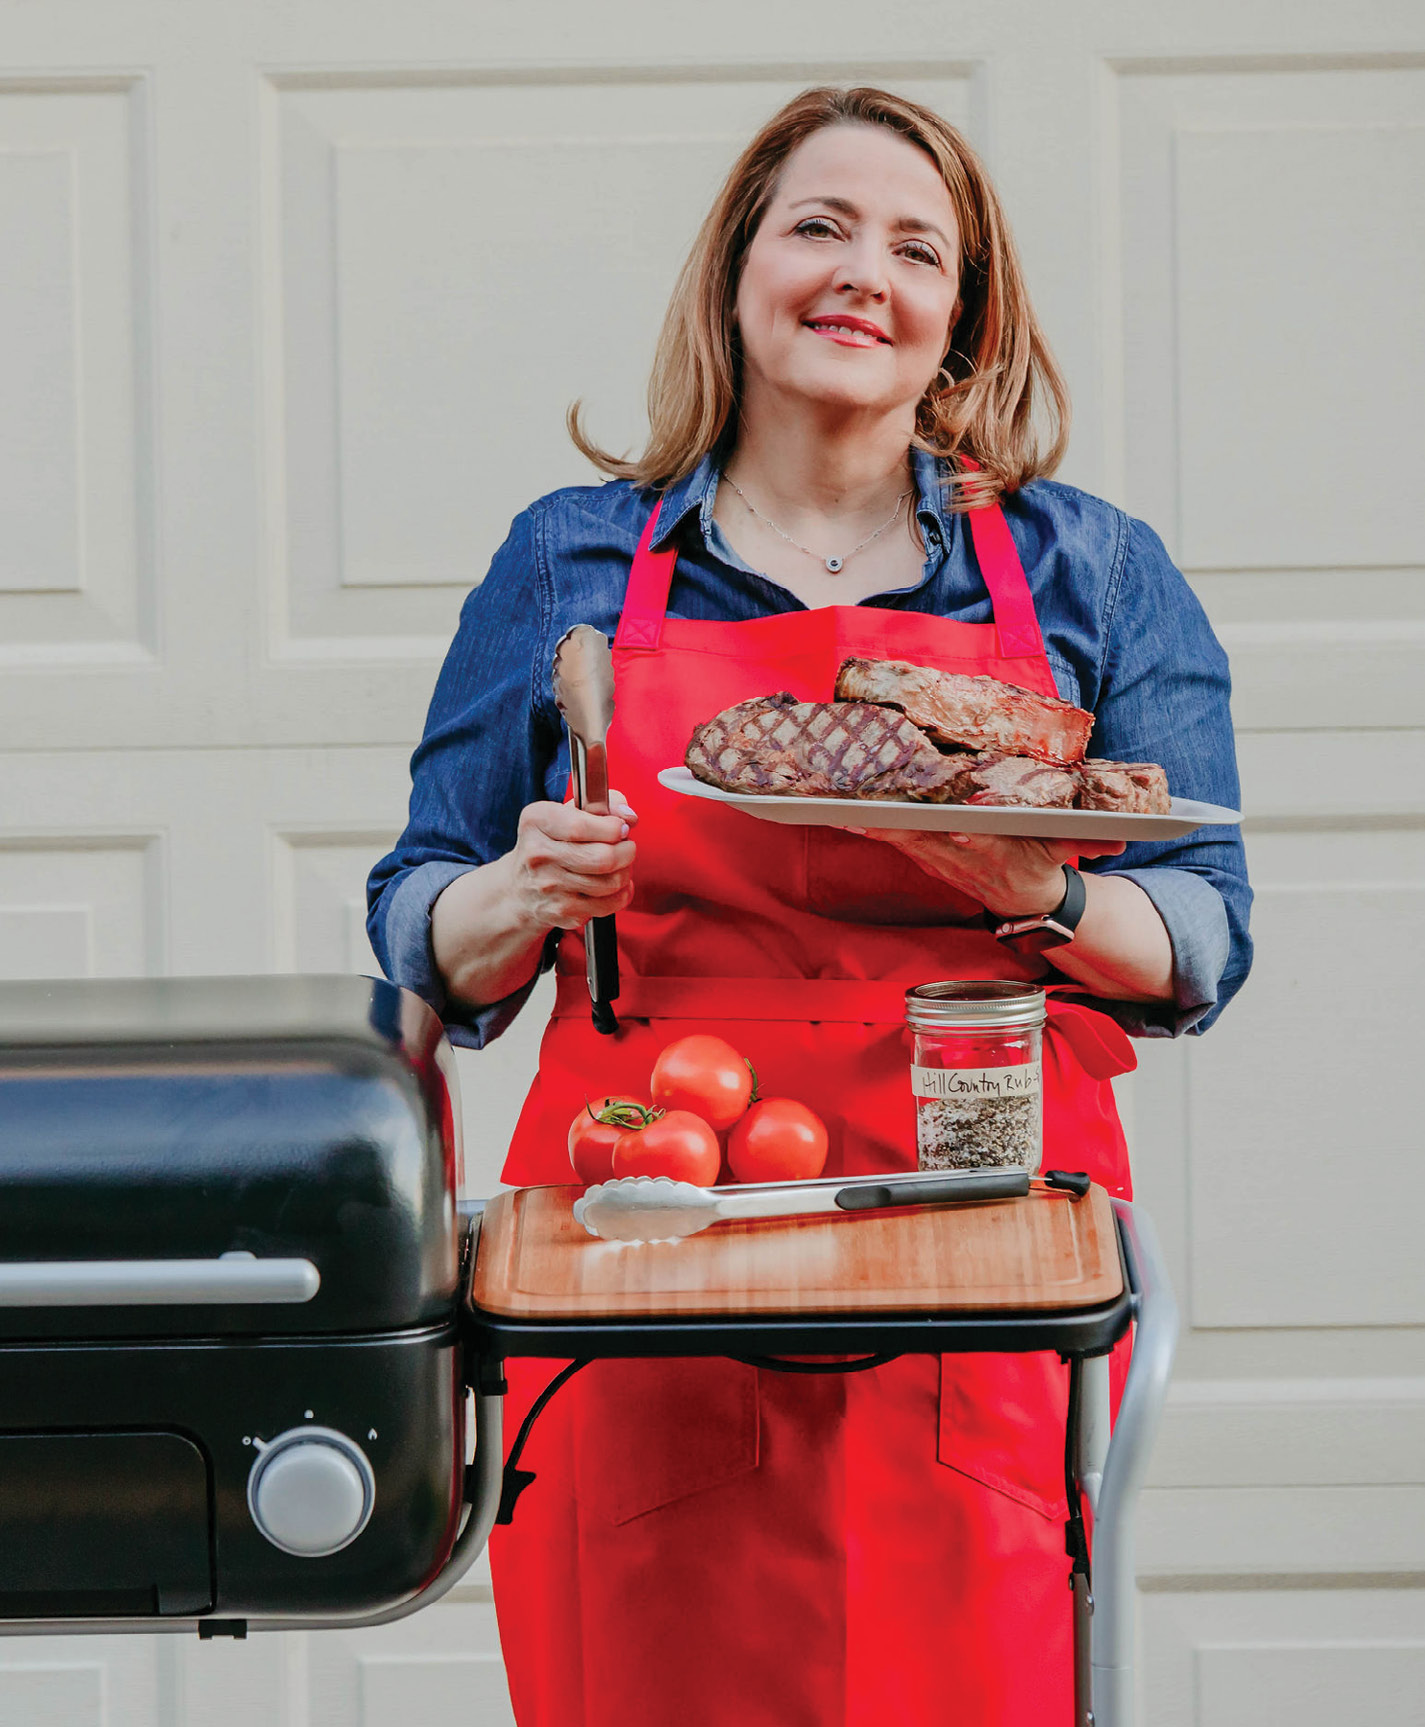 Elizabeth Karmel’s fourth cookbook, Steak and Cake (Workman, April 2019), combines her love of grilling and baking, offering readers complementary recipe combos.